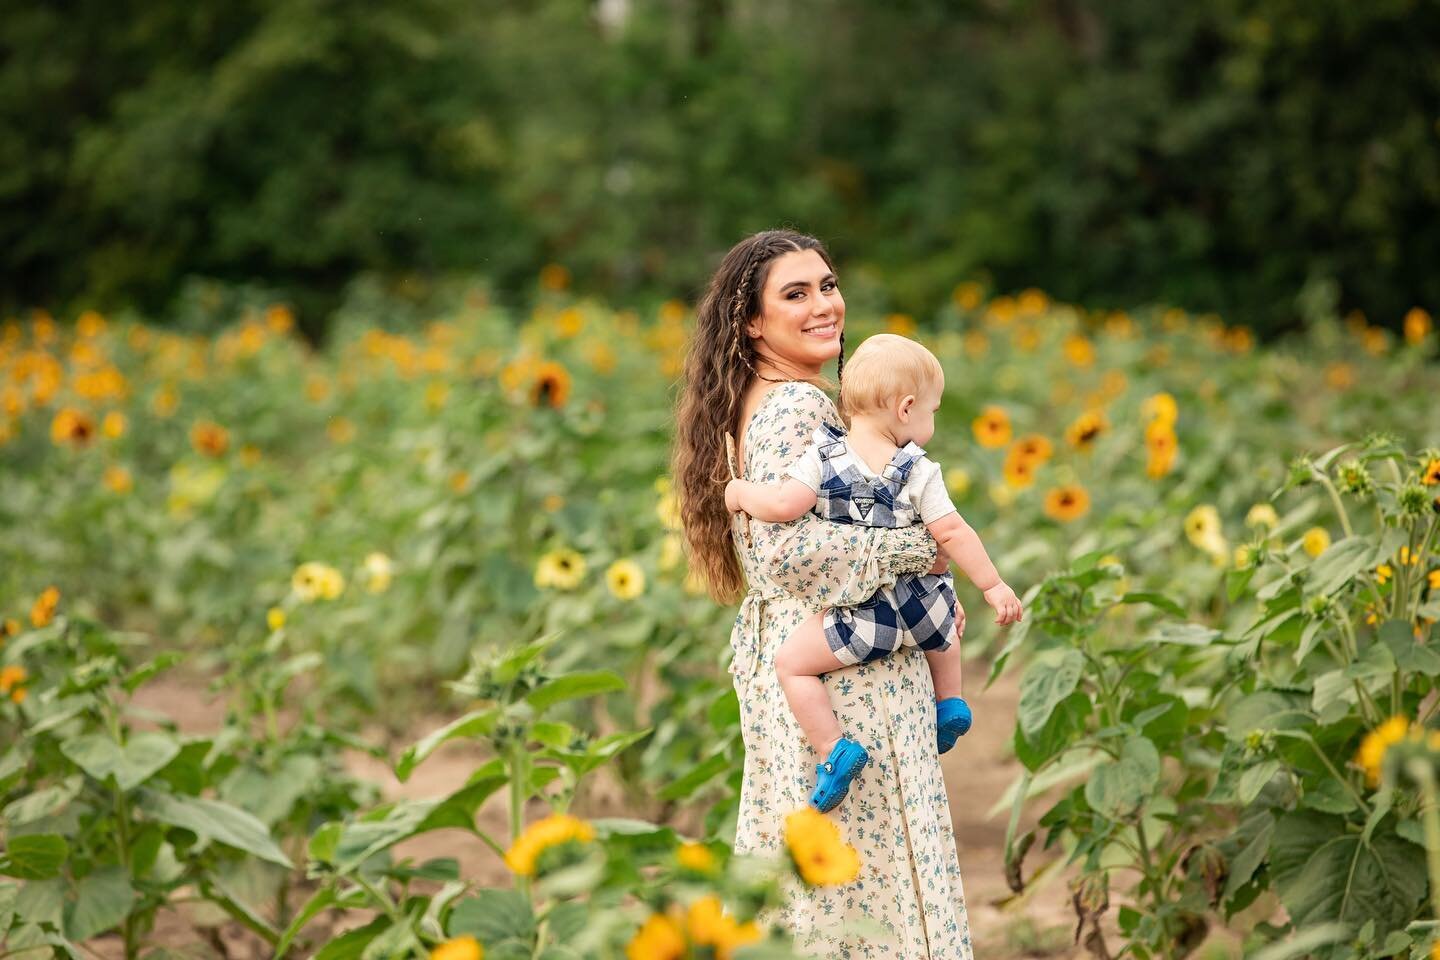 From our family sunflower 🌻 shoot with @ashleynizolekphotography the other day!!! I&rsquo;m obsessed!! 😍❤️&zwj;🔥 Thank you so much Ashley for capturing my chaotic but beautiful family ✨🌻 @libertyridgefarmweddings dress: @renttherunway